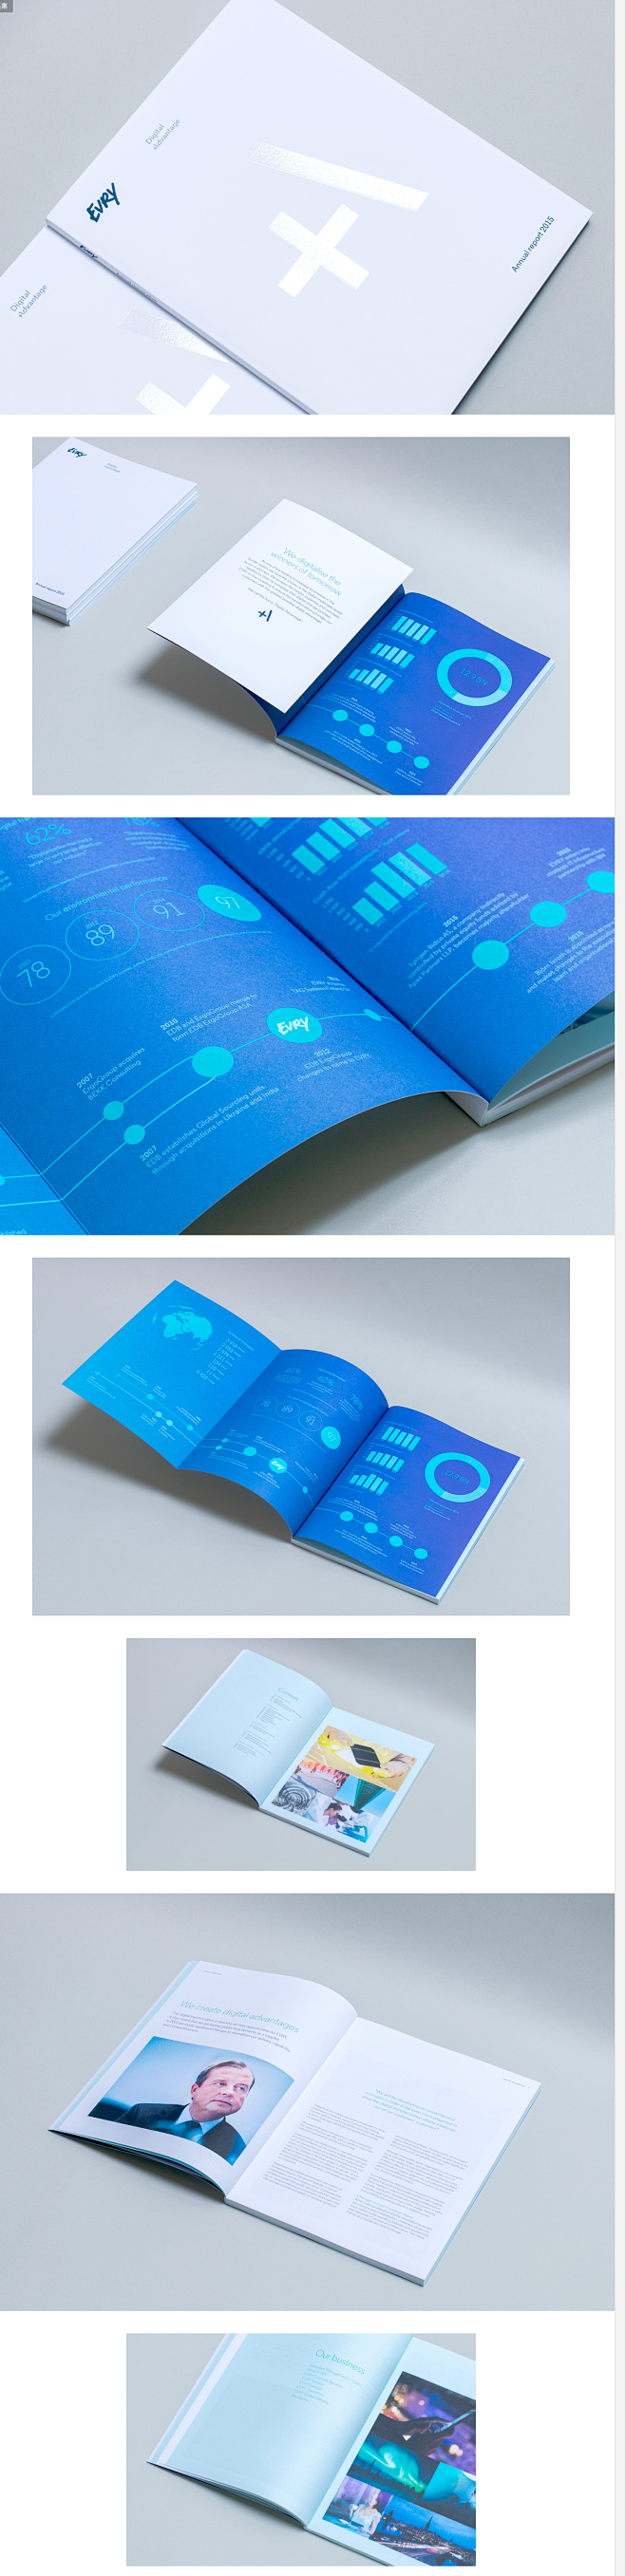 EVRY – Annual Report...